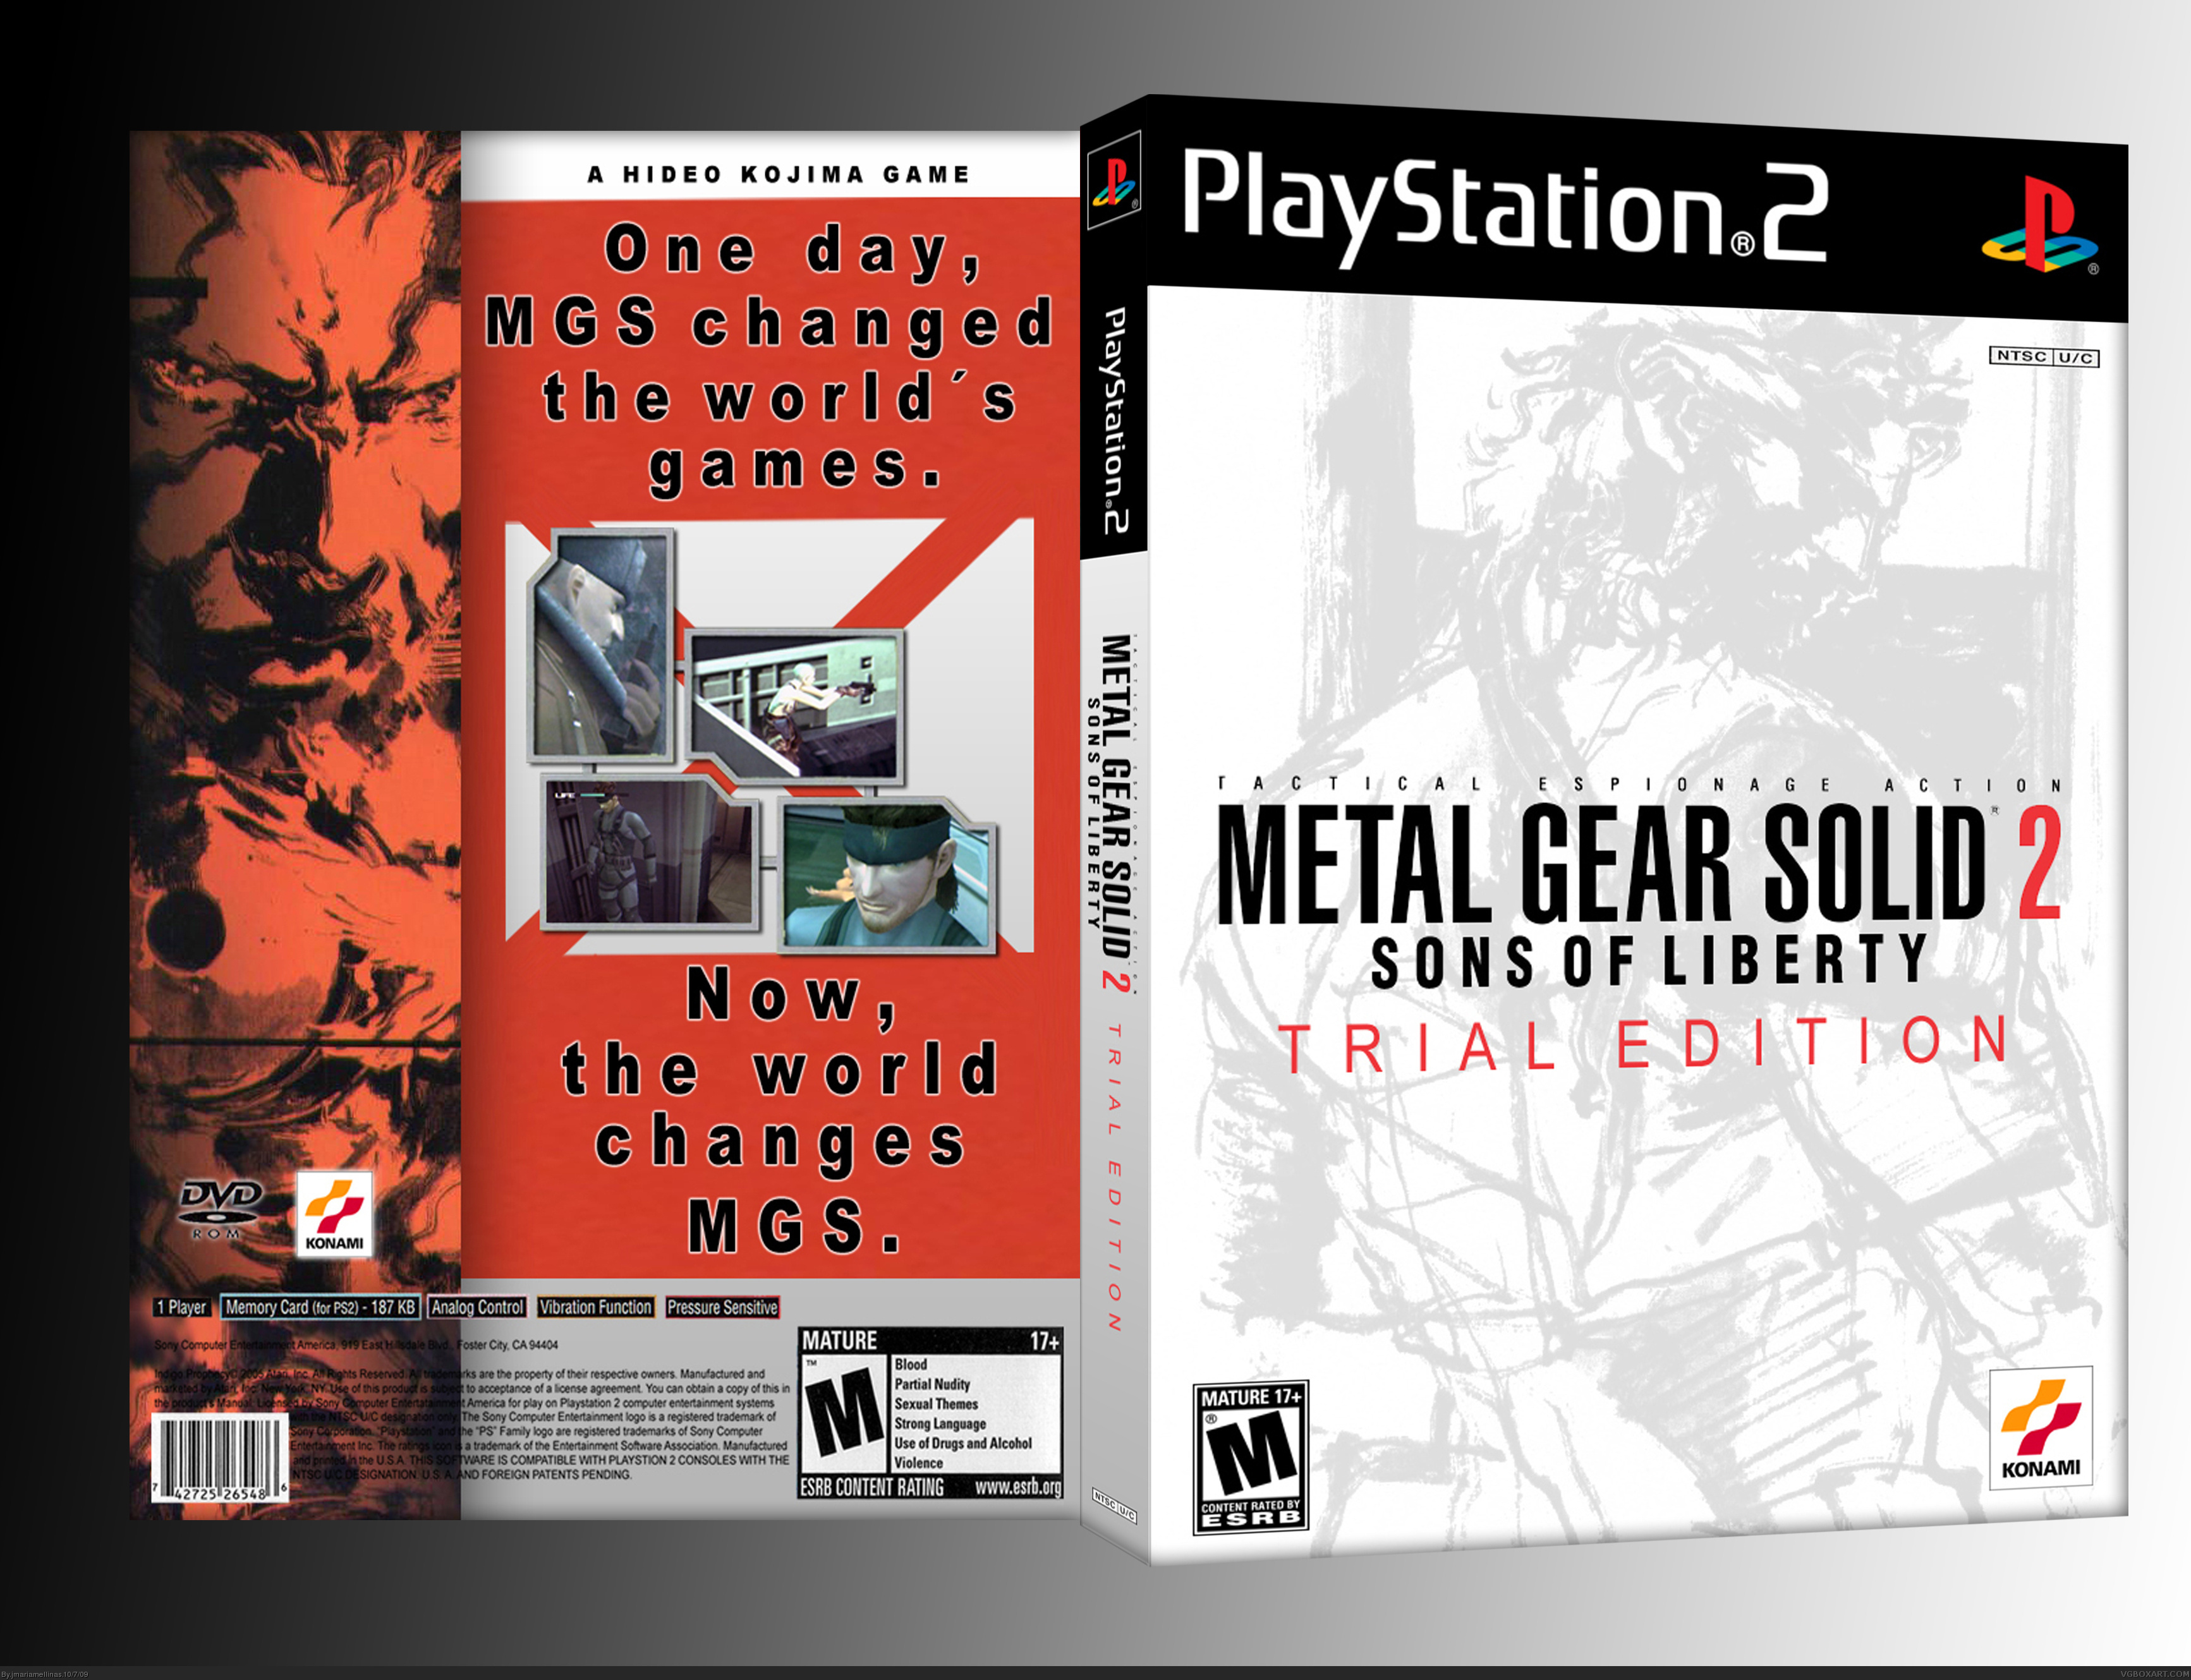 Metal Gear Solid 2 Trial Edition box cover